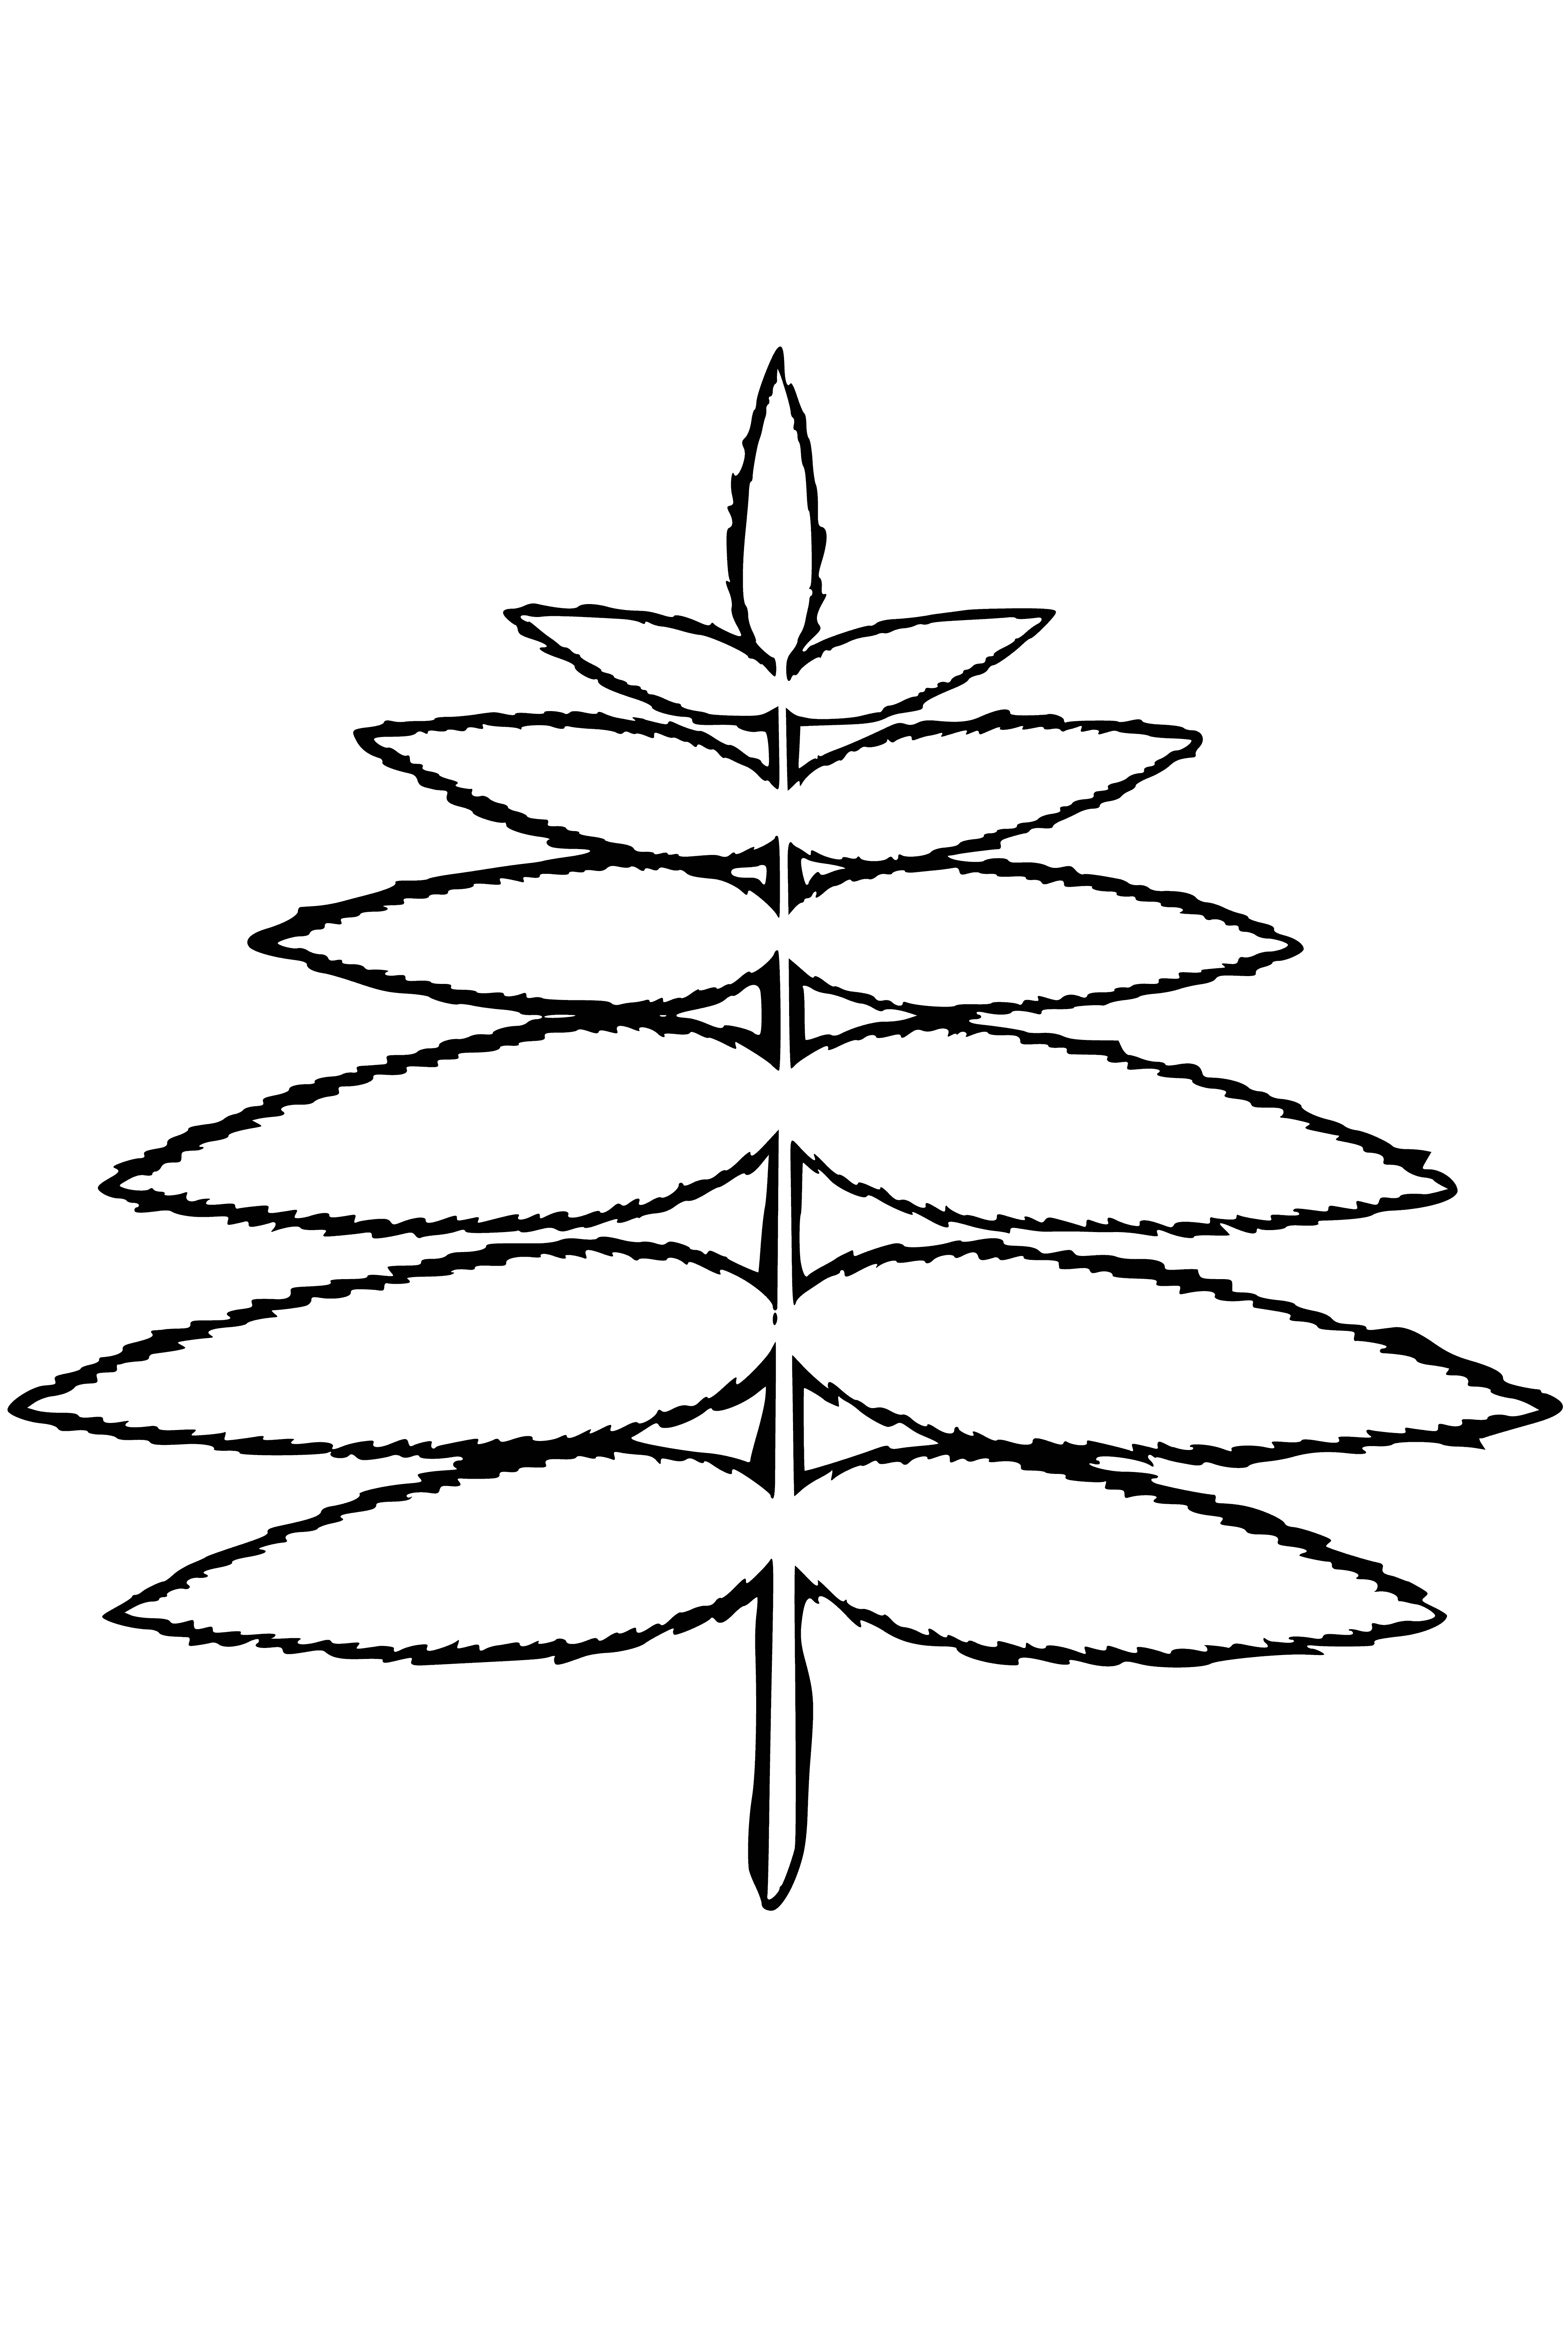 coloring page: Three leaves arranged in a spiral, one red, fluffy fruit.